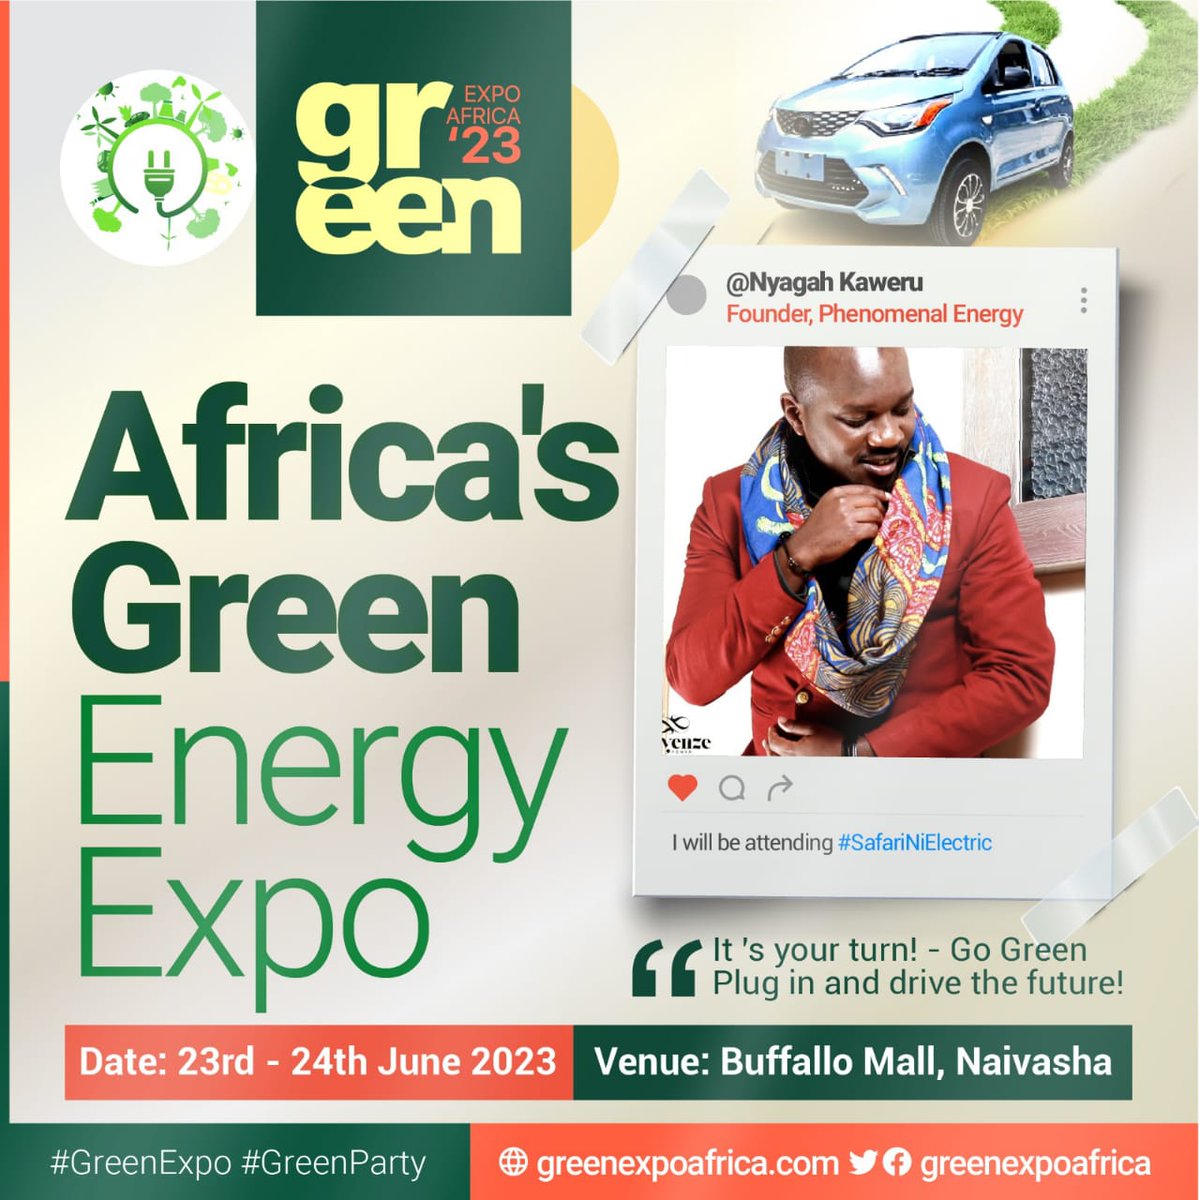 #GreenExpo seeks to provide experience in the convergence of sustainability and innovation, transforming our continent and world at large.

#GoElectric
#SafariNiElectric
#WRCSafari2023